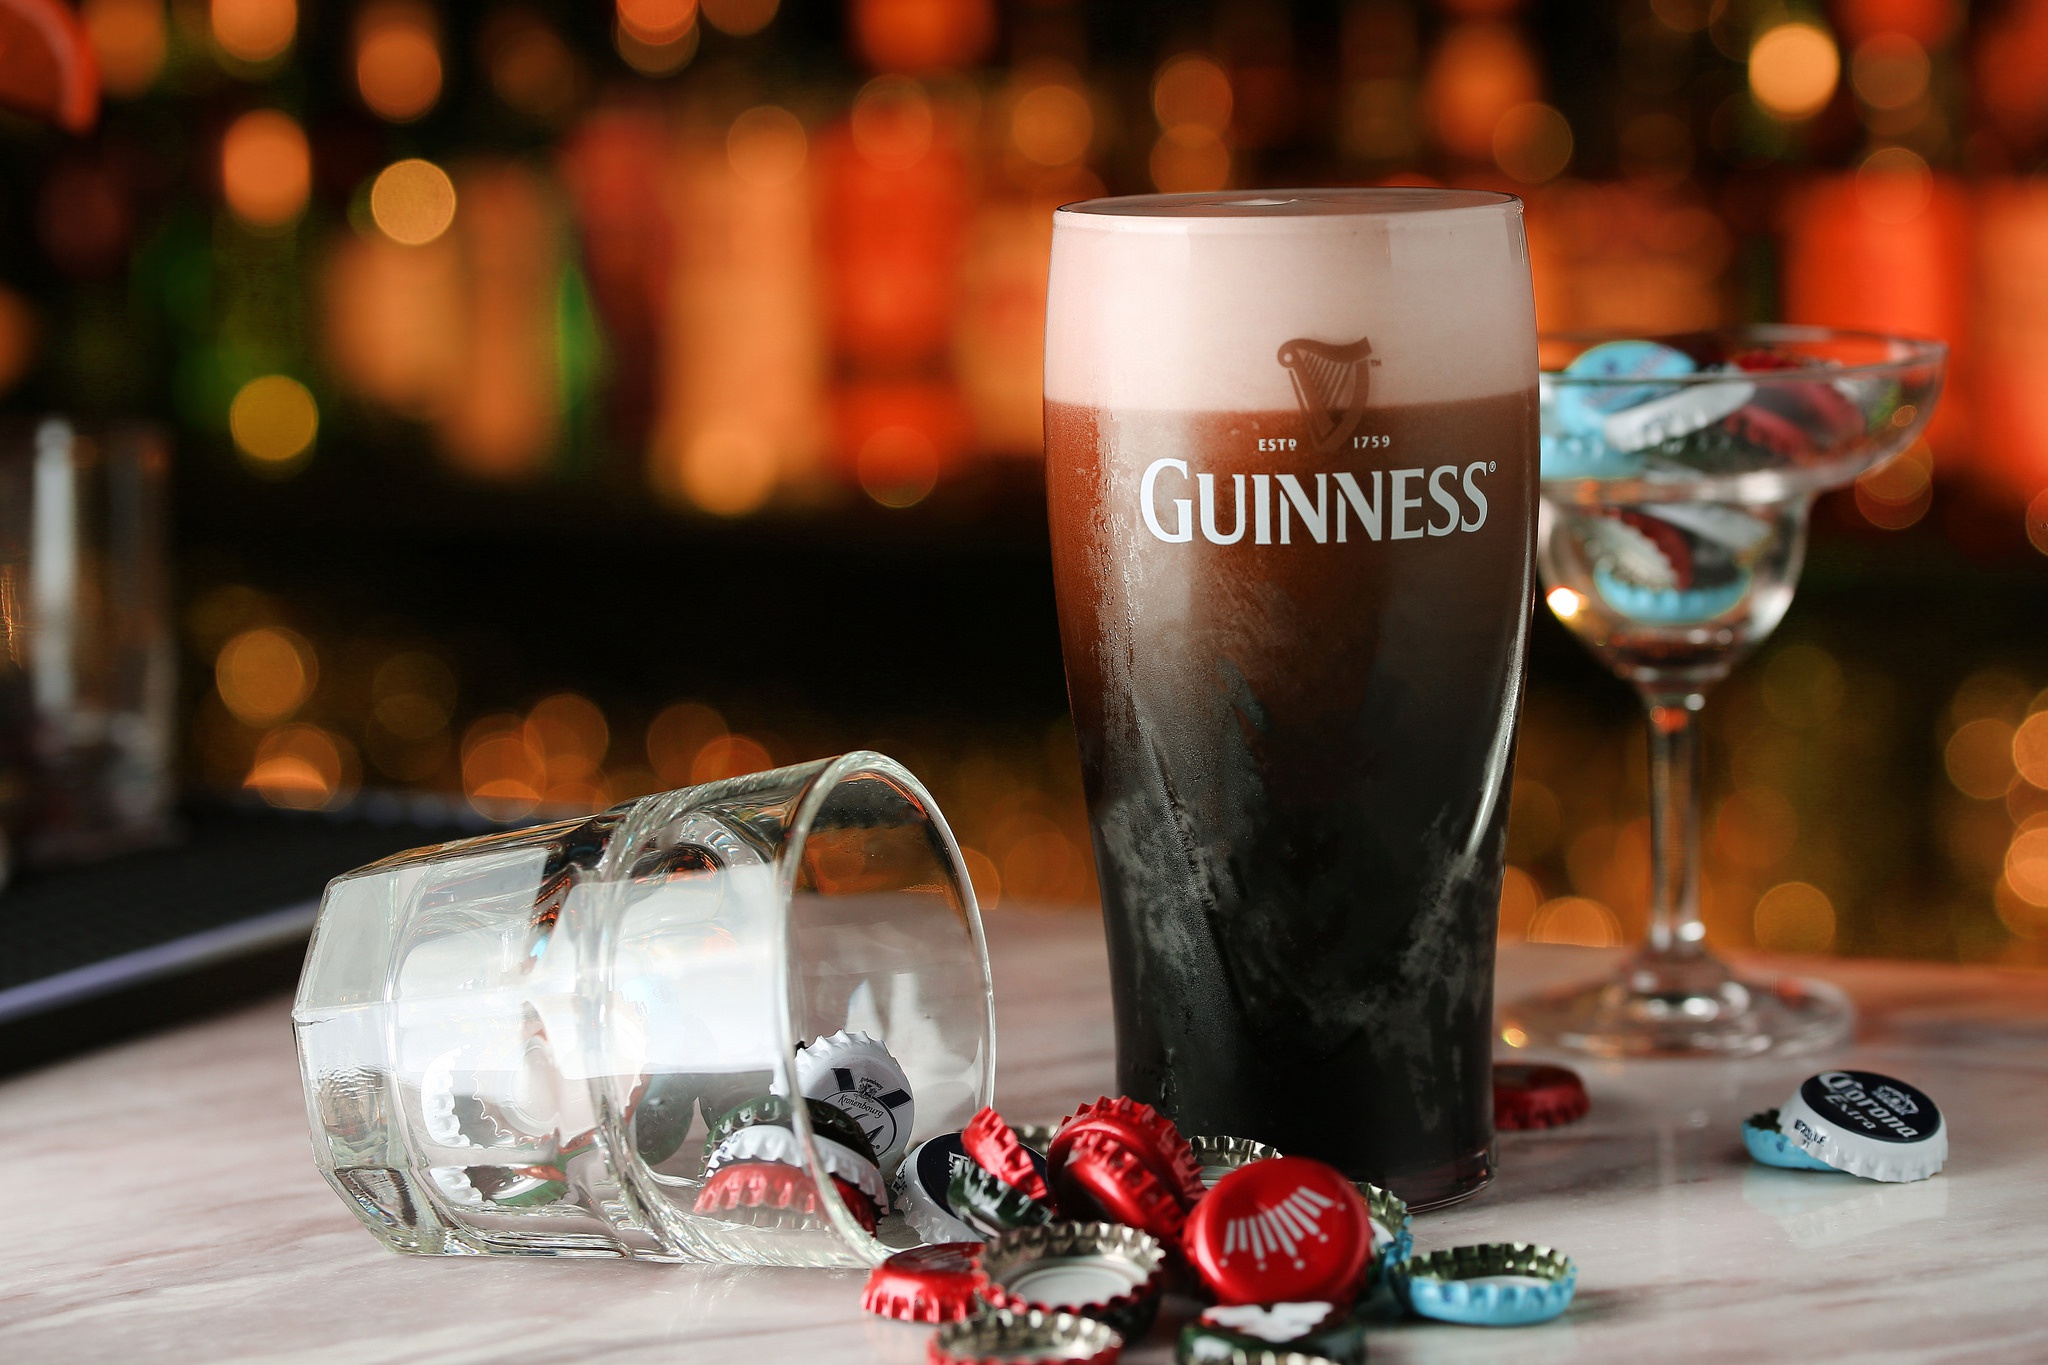 guinness, products, alcohol, bokeh, drink, glass lock screen backgrounds